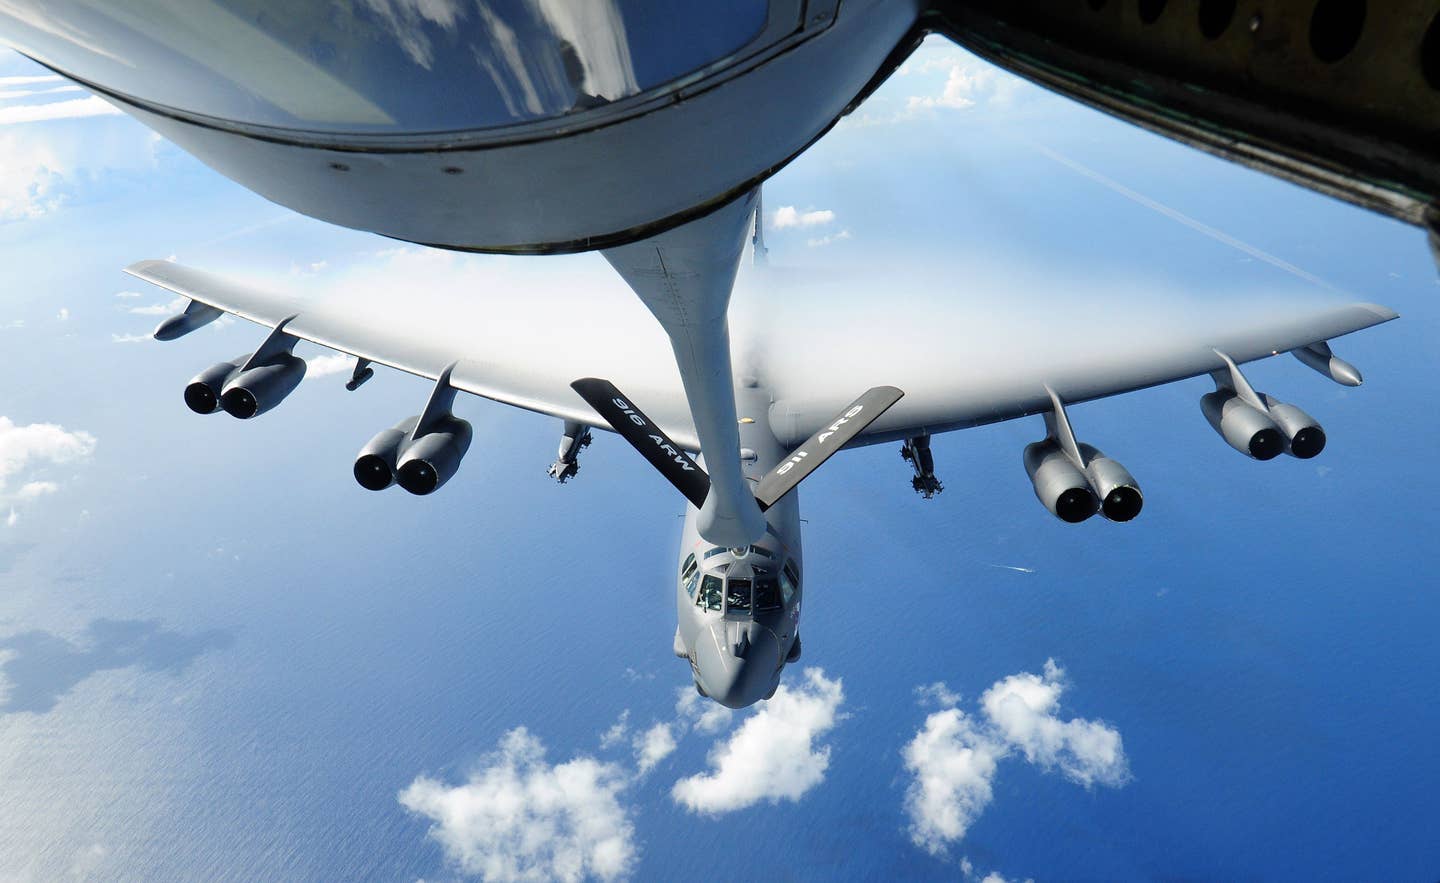 SEYMOUR JOHNSON AIR FORCE BASE, N.C. -- Airmen of the 916th begin to return to home in early November after a deployment to Guam supporting the bomber mission. Here, a KC-135 tanker refuels a B-52.